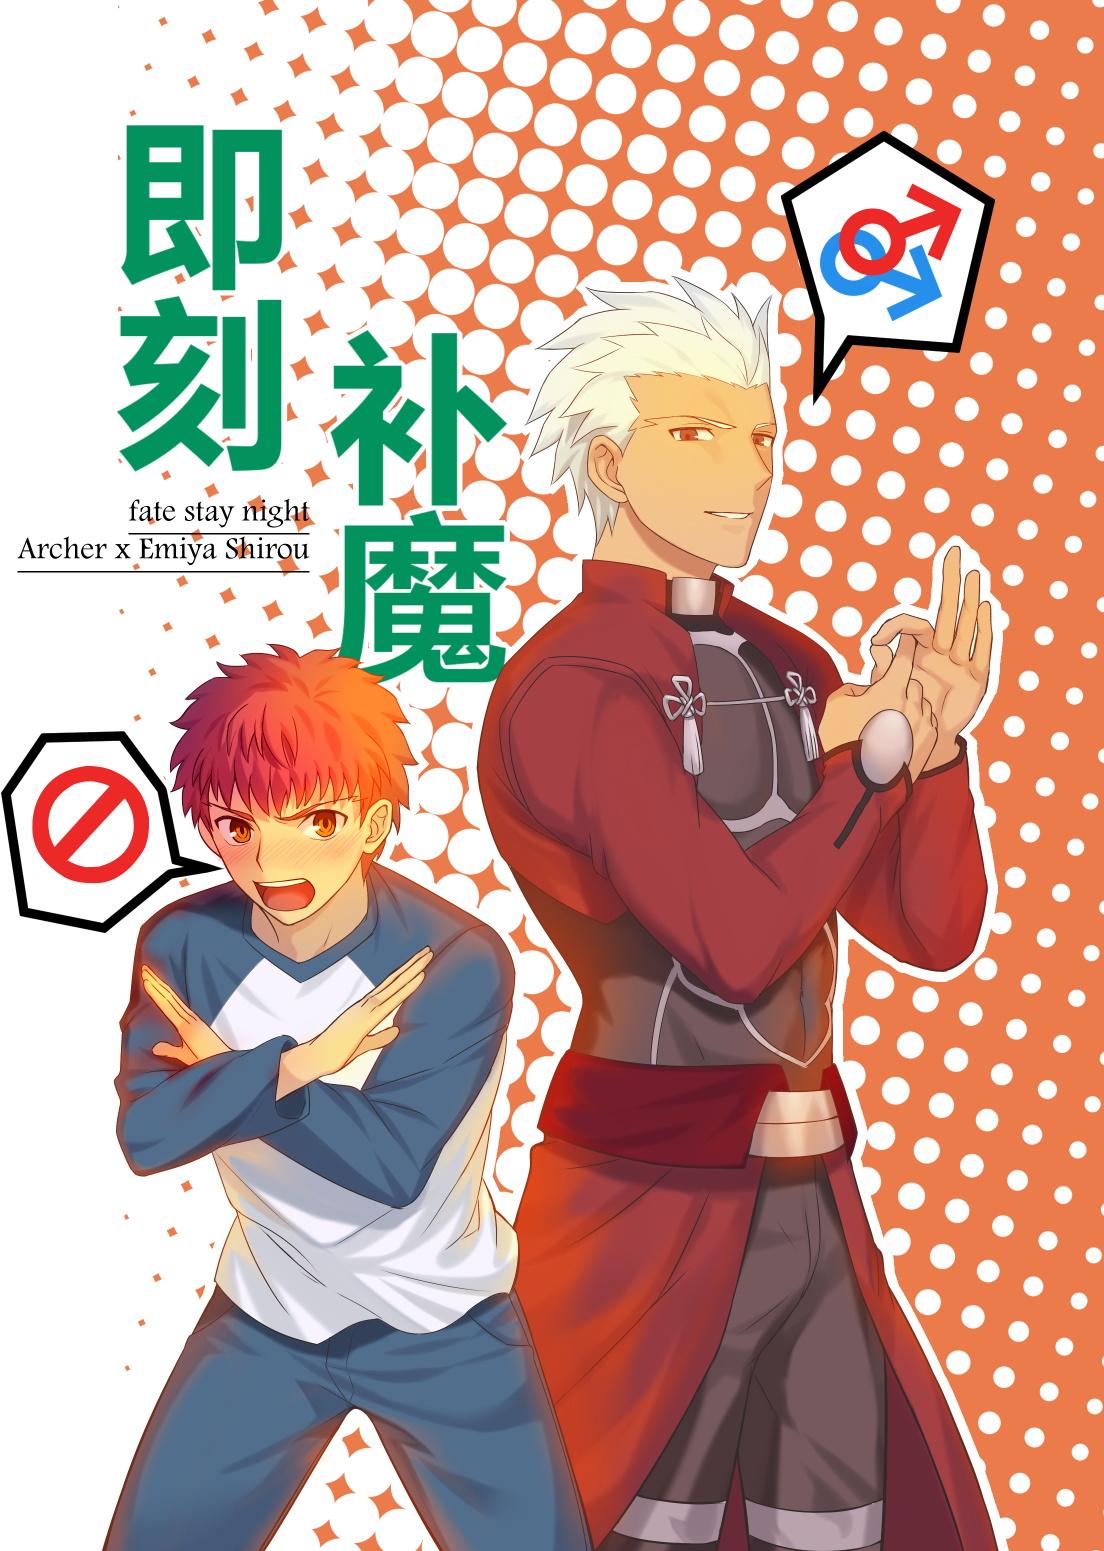 Instagram Archer x Emiya Shirou - Fate stay night Hot Whores - Picture 1